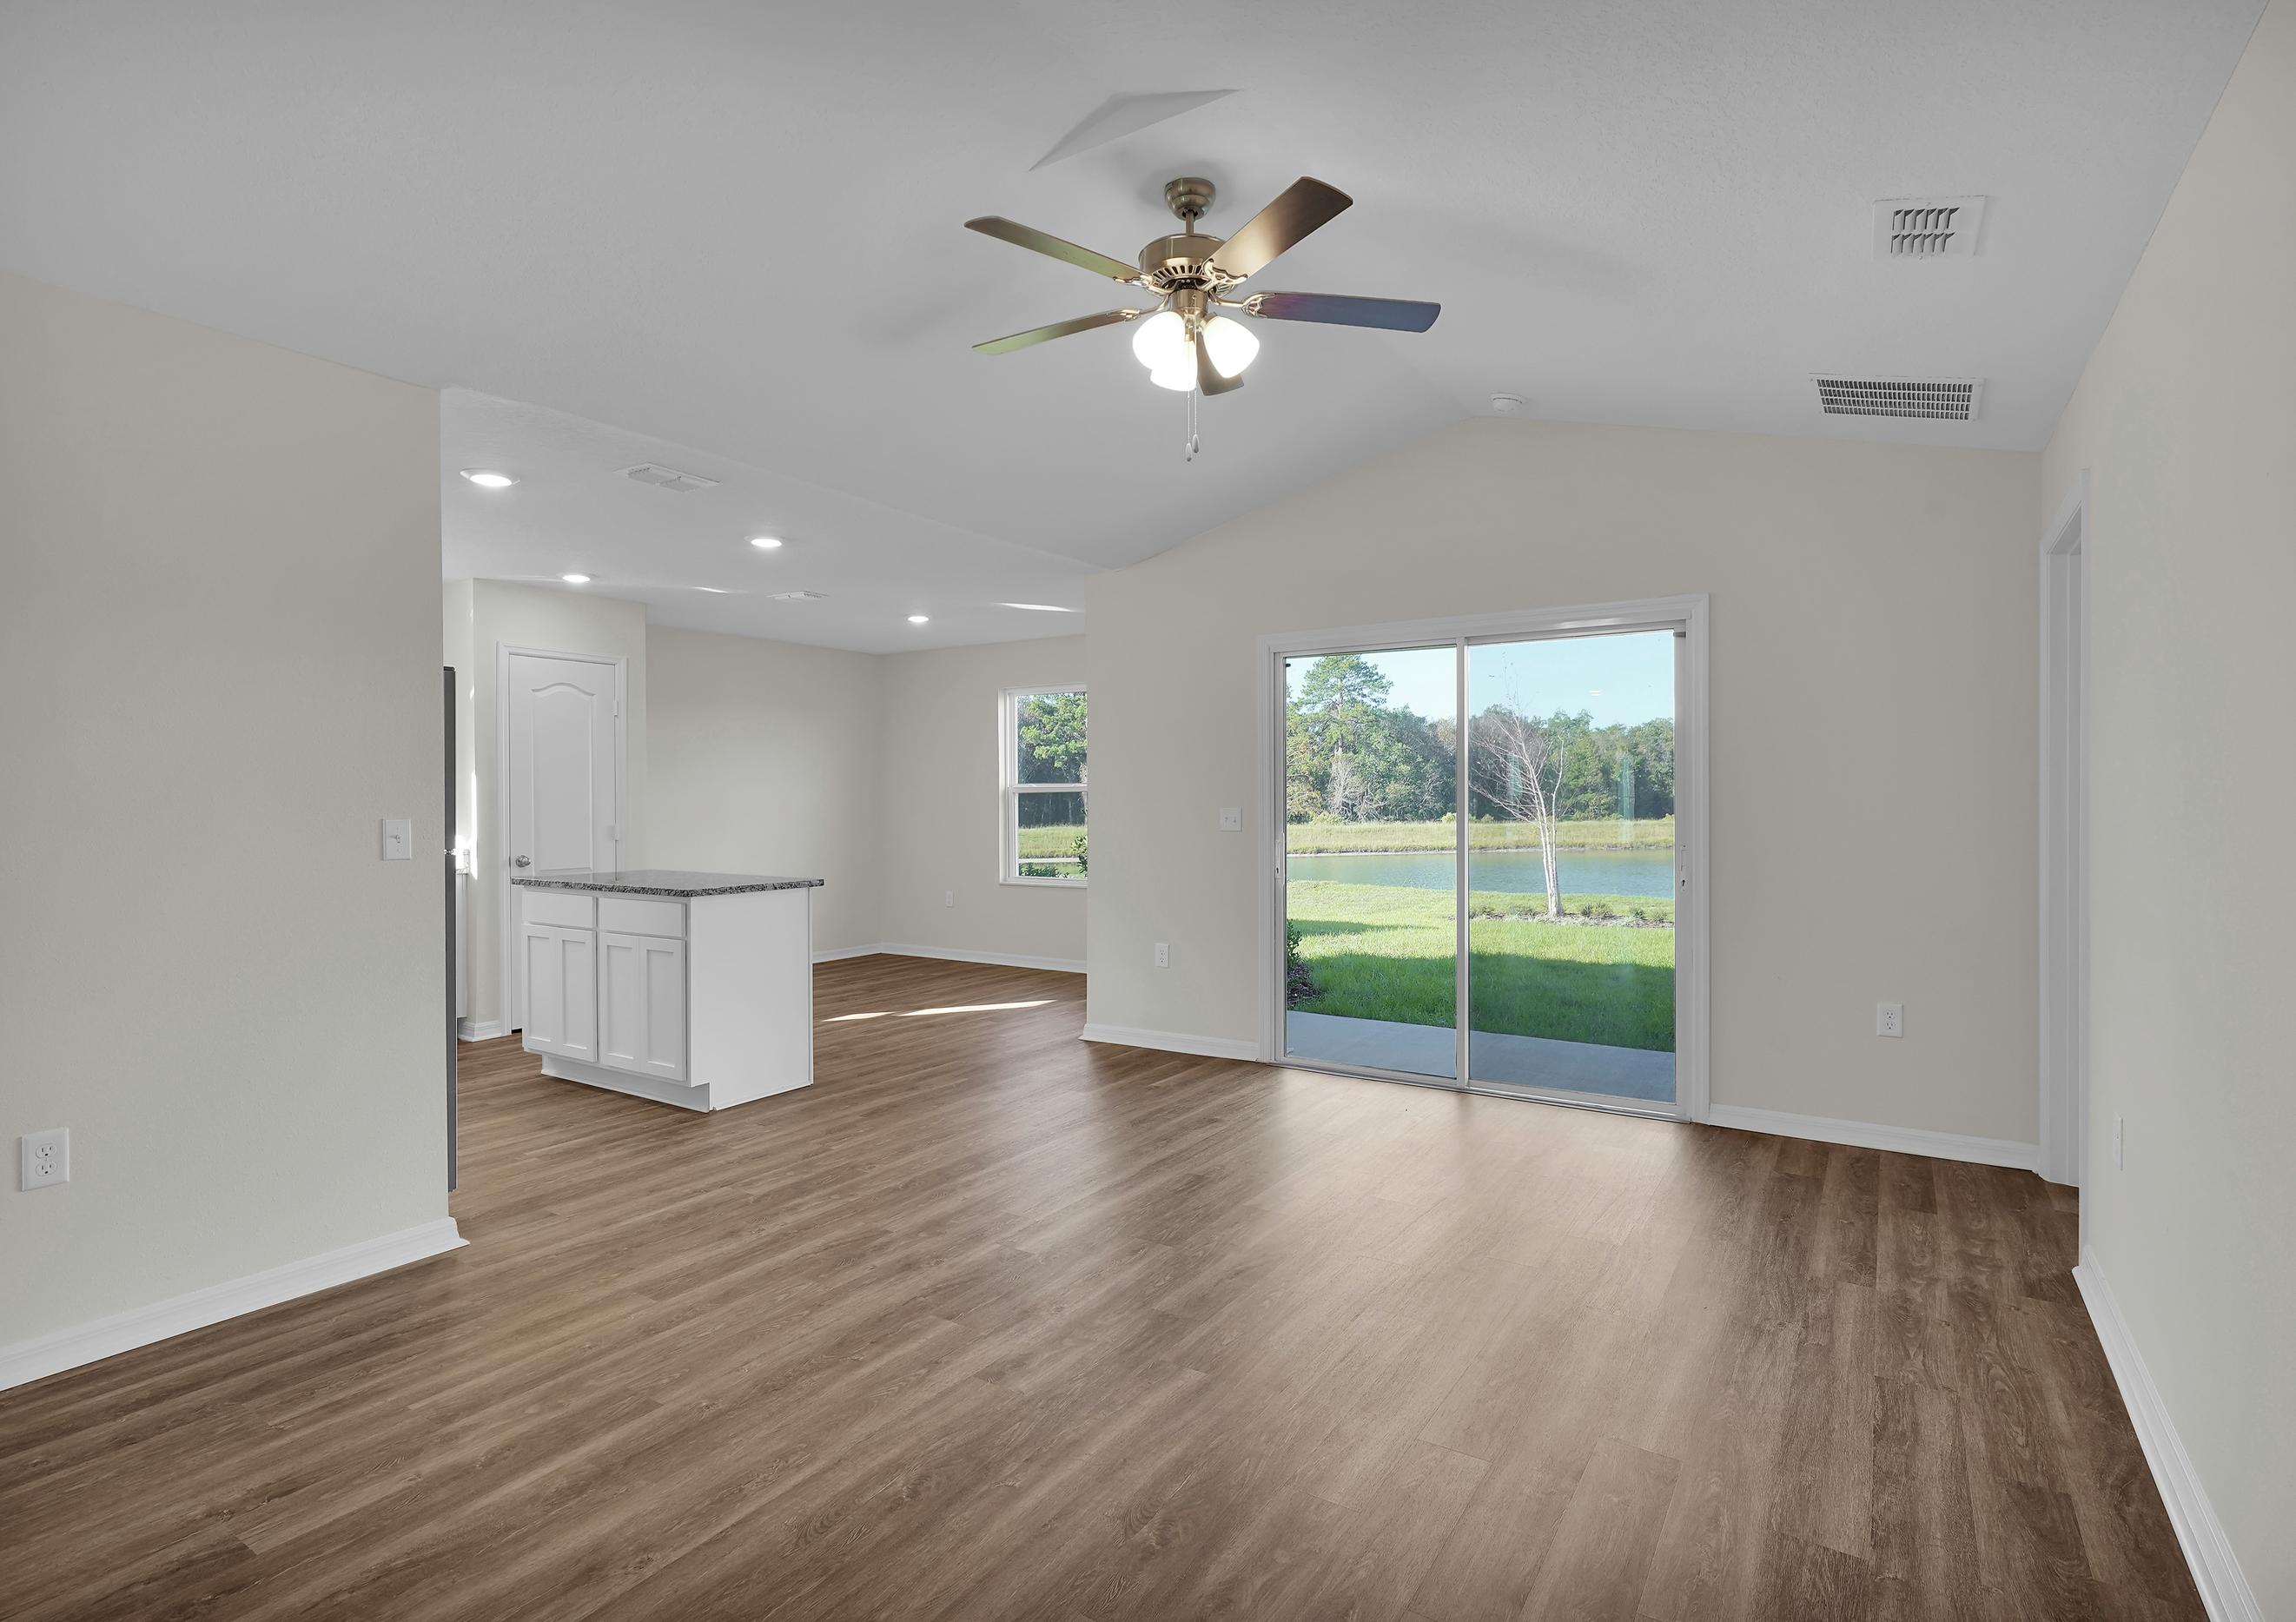 Move freely between the family room and kitchen